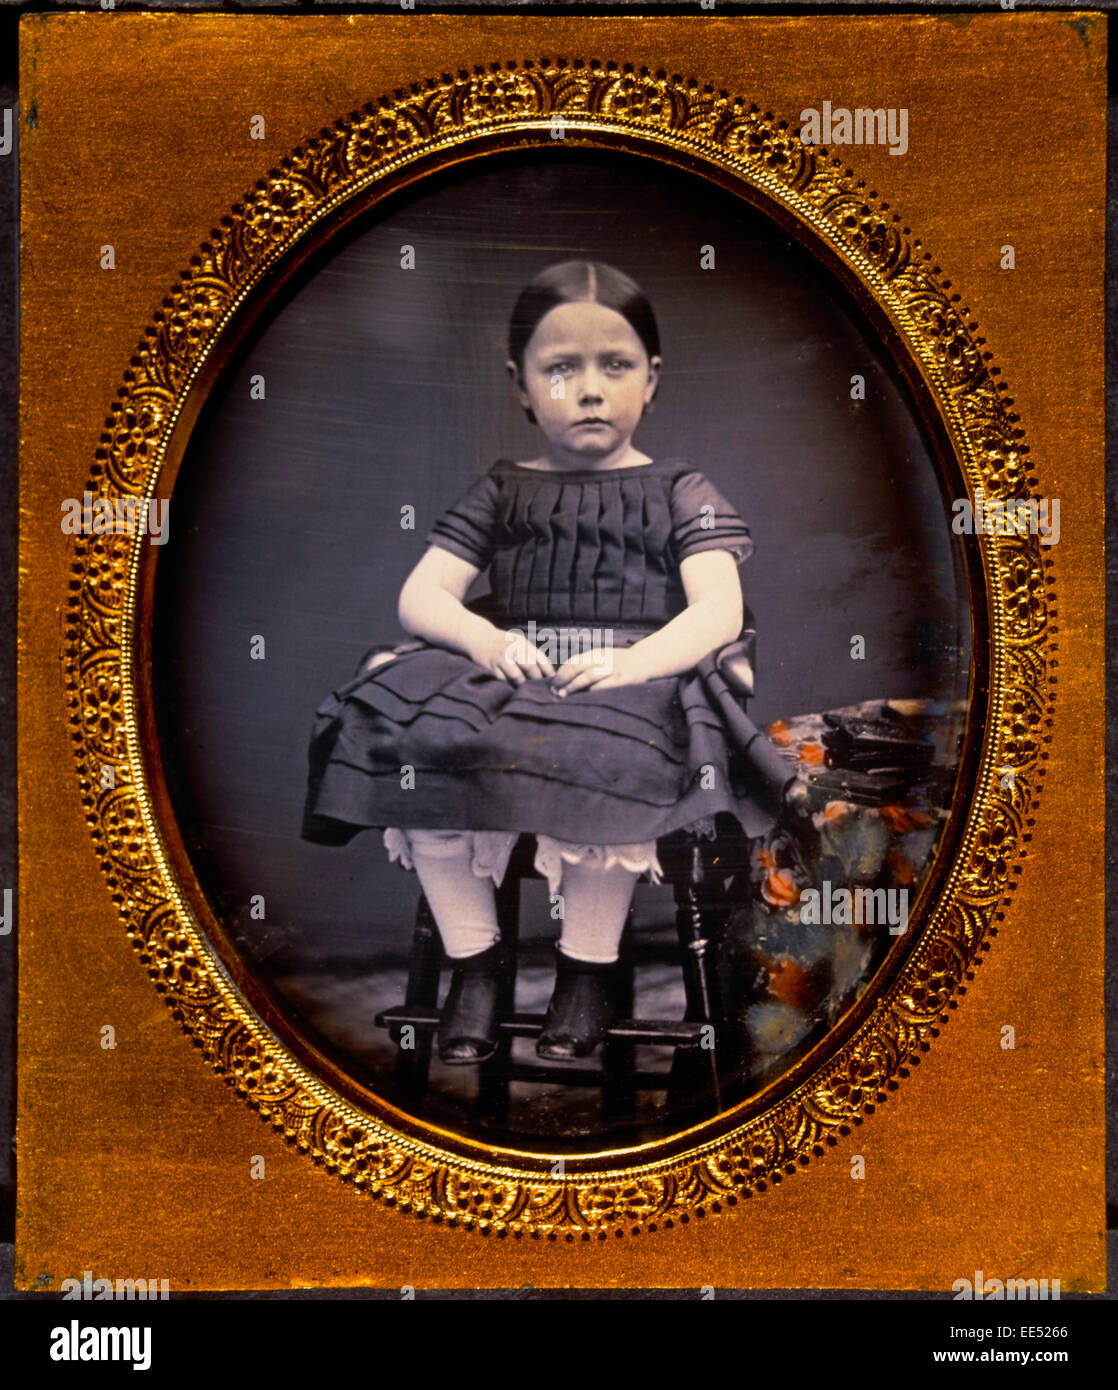 Young Girl Sitting in Chair, Portrait, Daguerreotype, circa 1850's Stock Photo